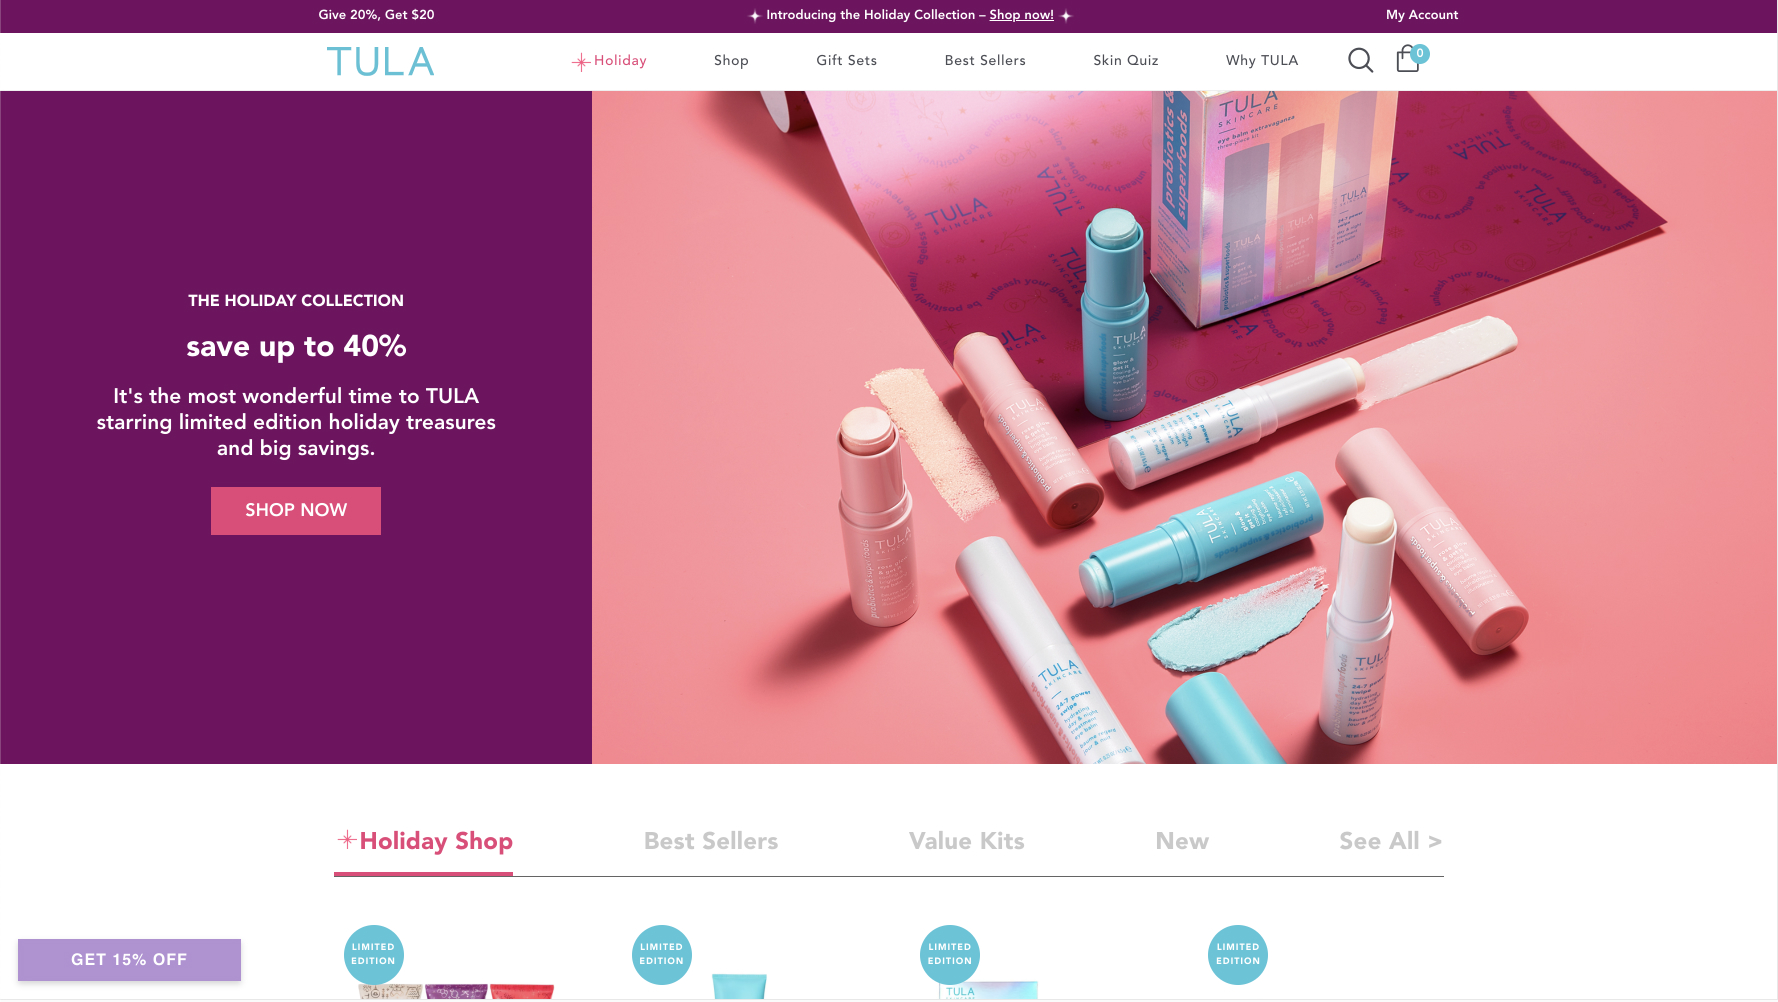 The homepage of the TULA website